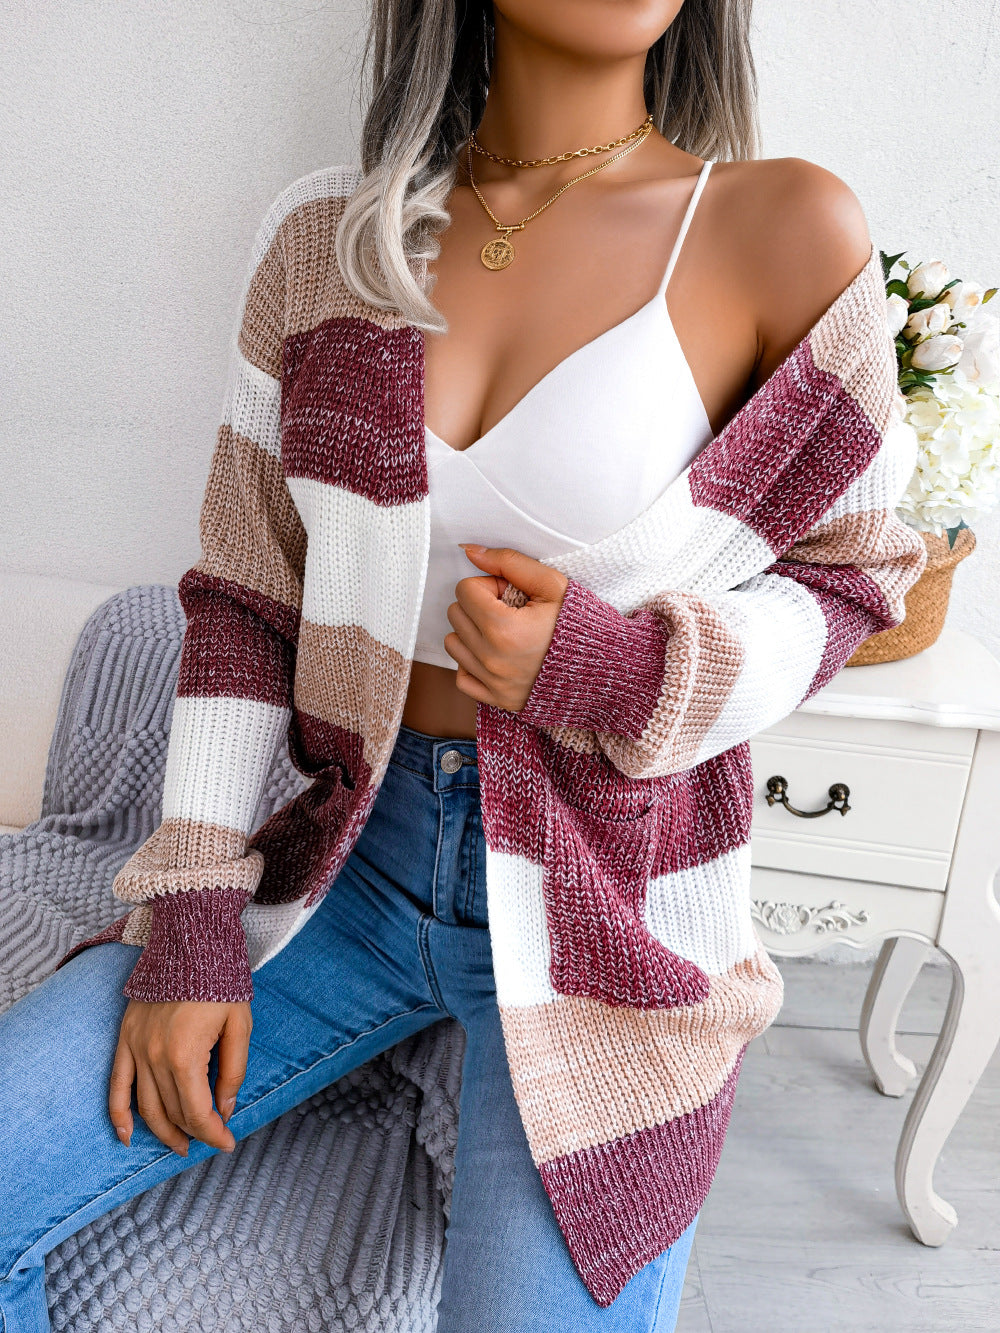 Plaid Sweater Women Casual Lantern Sleeves Cardigan Jacket Outerwear Clothes | GlamzLife